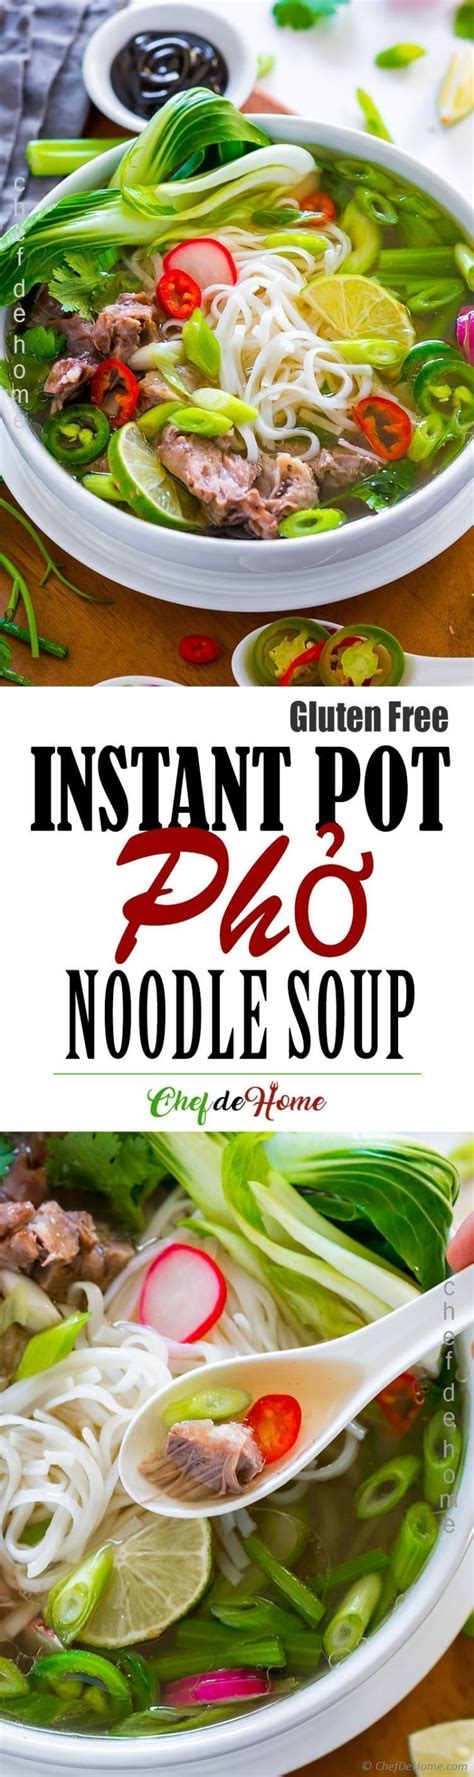 Instant Pot Pho Vietnamese Noodle Soup The Authentic Pho Is Cooked Low Slow For 8 Hours But